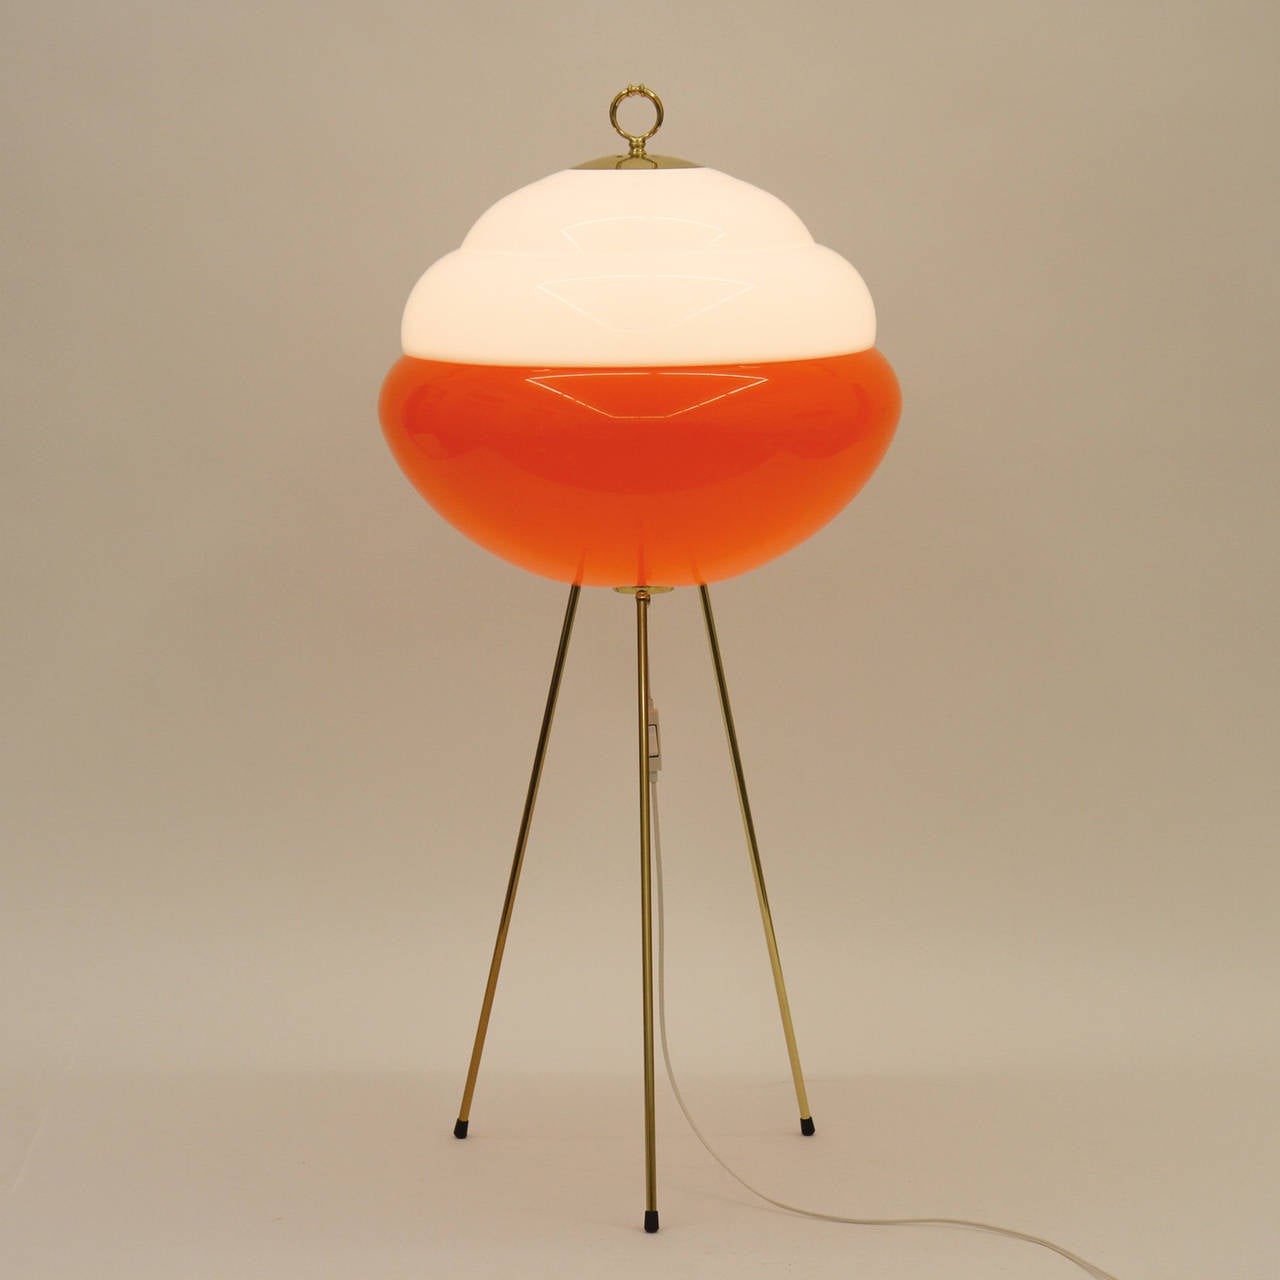 Mid-20th Century Italian Perspex and Brass Floor Lamp in the Style of Gio Ponti